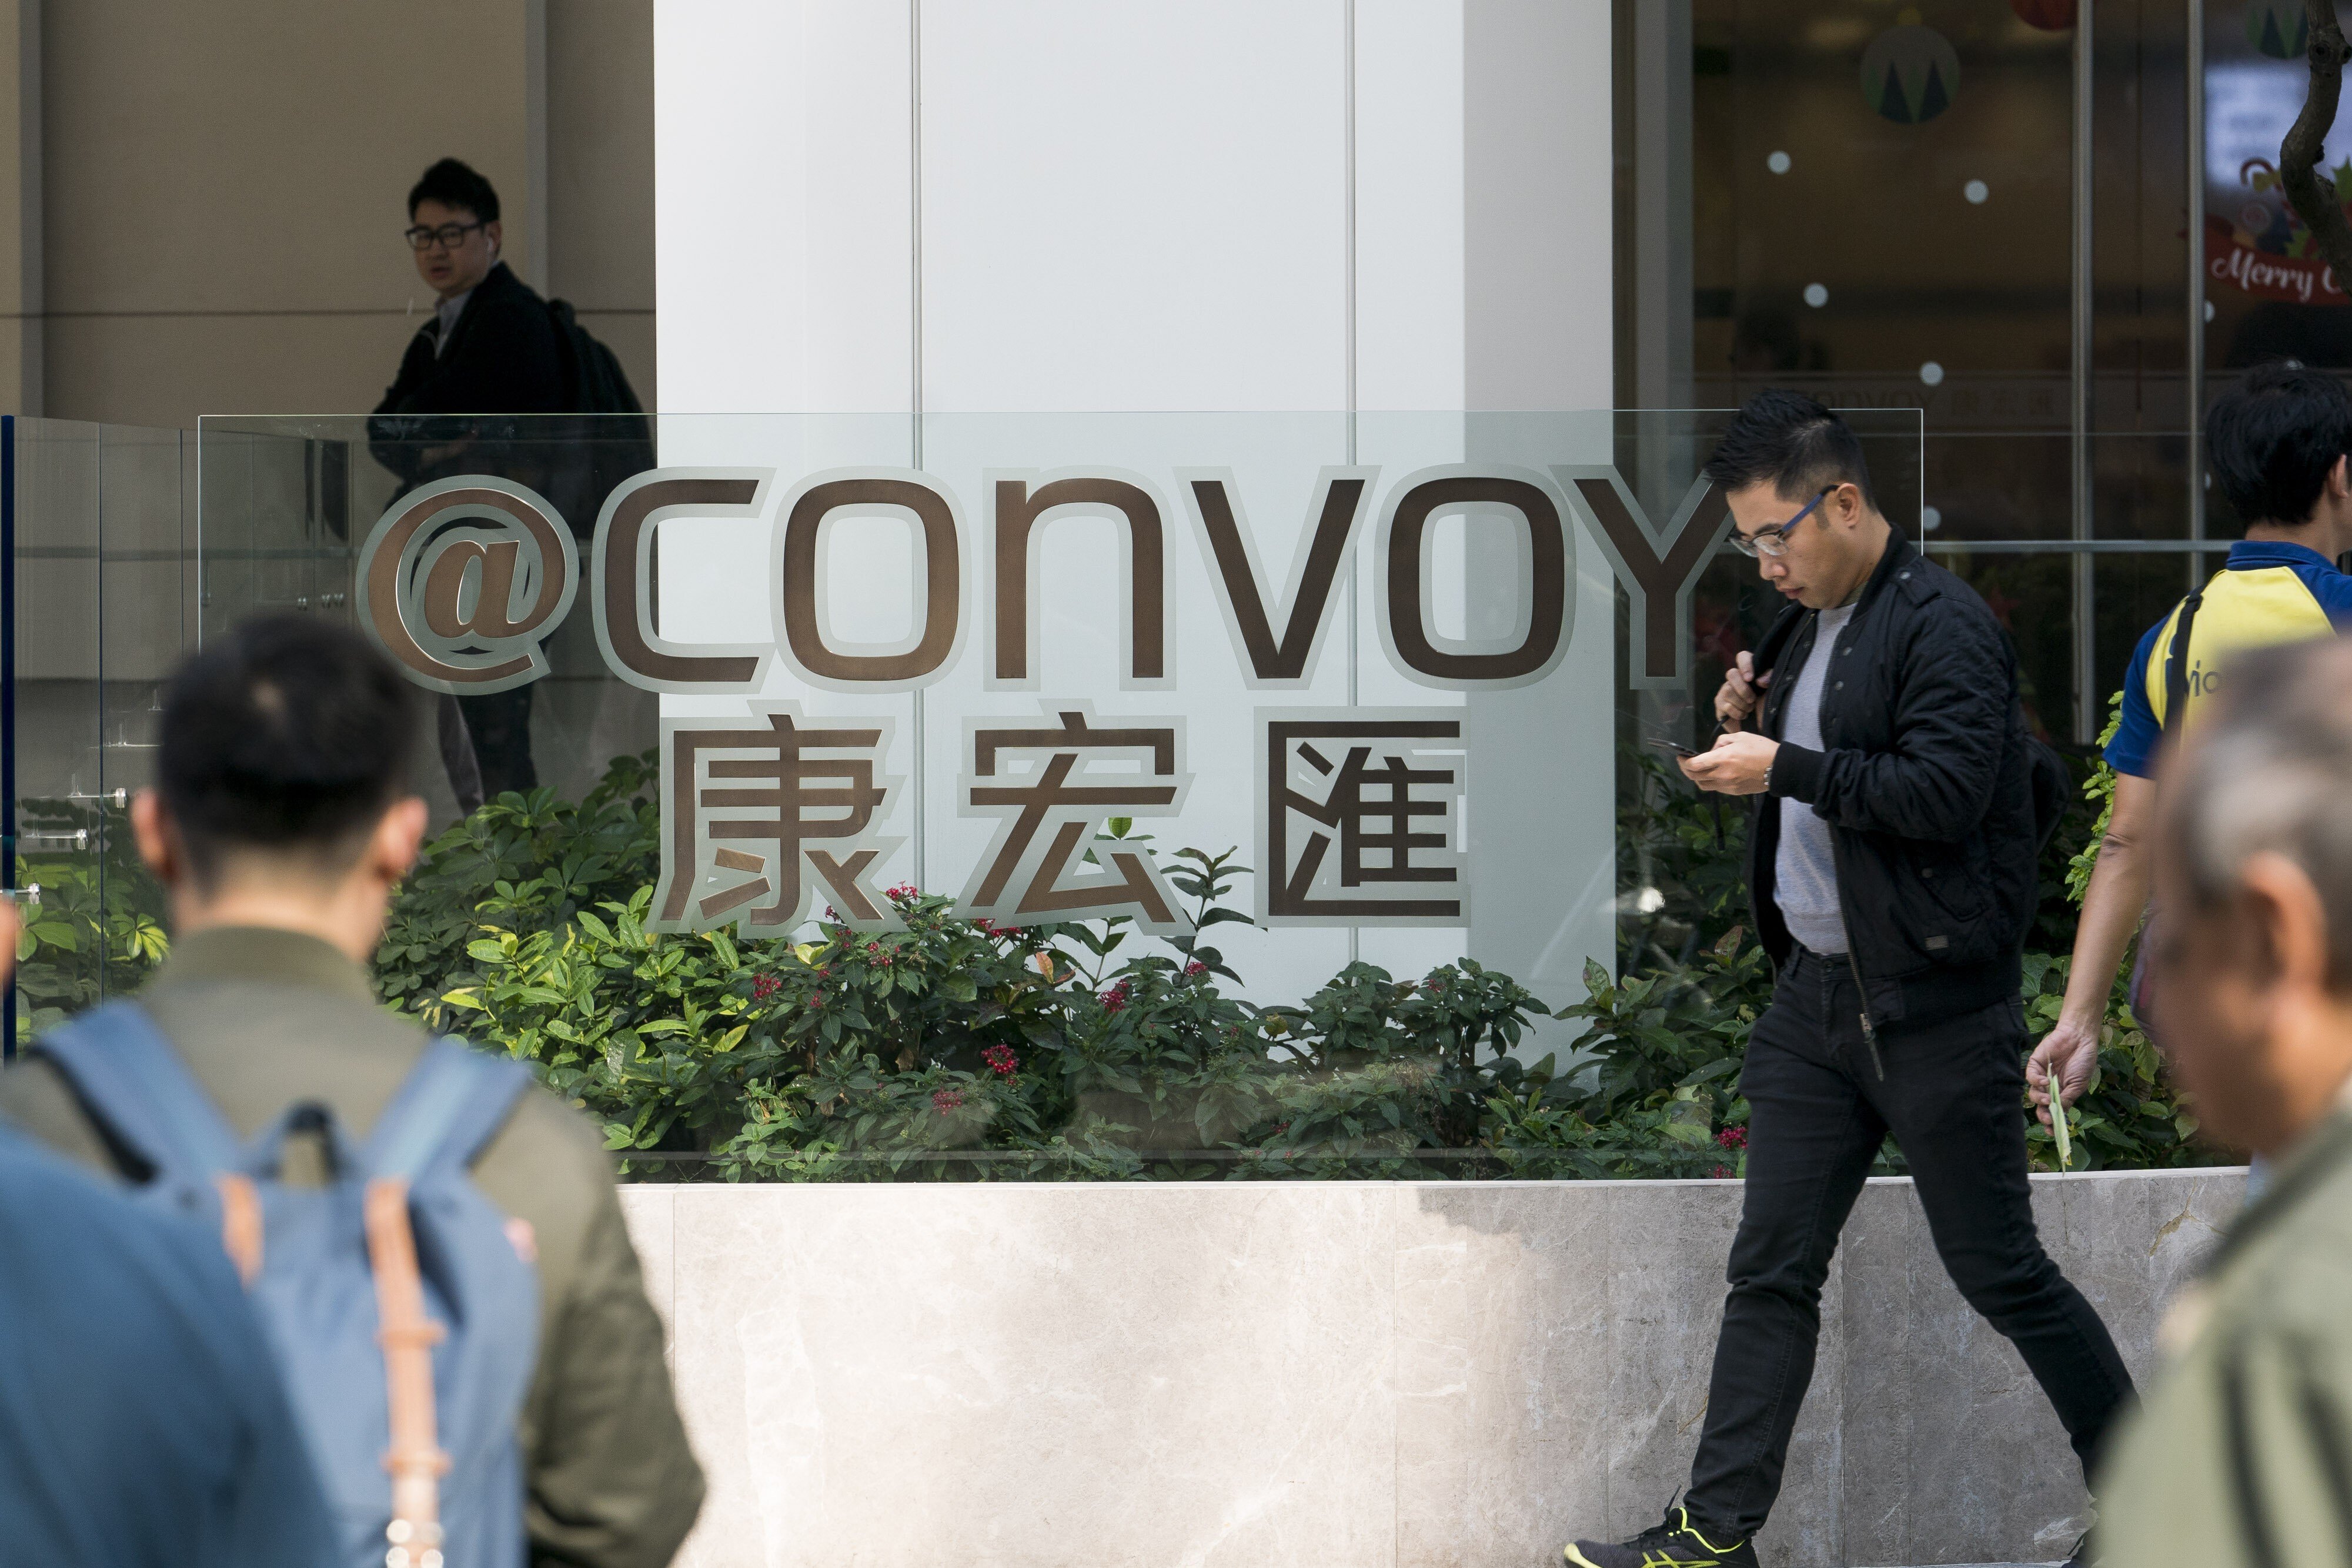 Pedestrians walk past the @Convoy building, which houses the headquarters of Convoy Global Holdings in Hong Kong in December 2017. Photo: Bloomberg